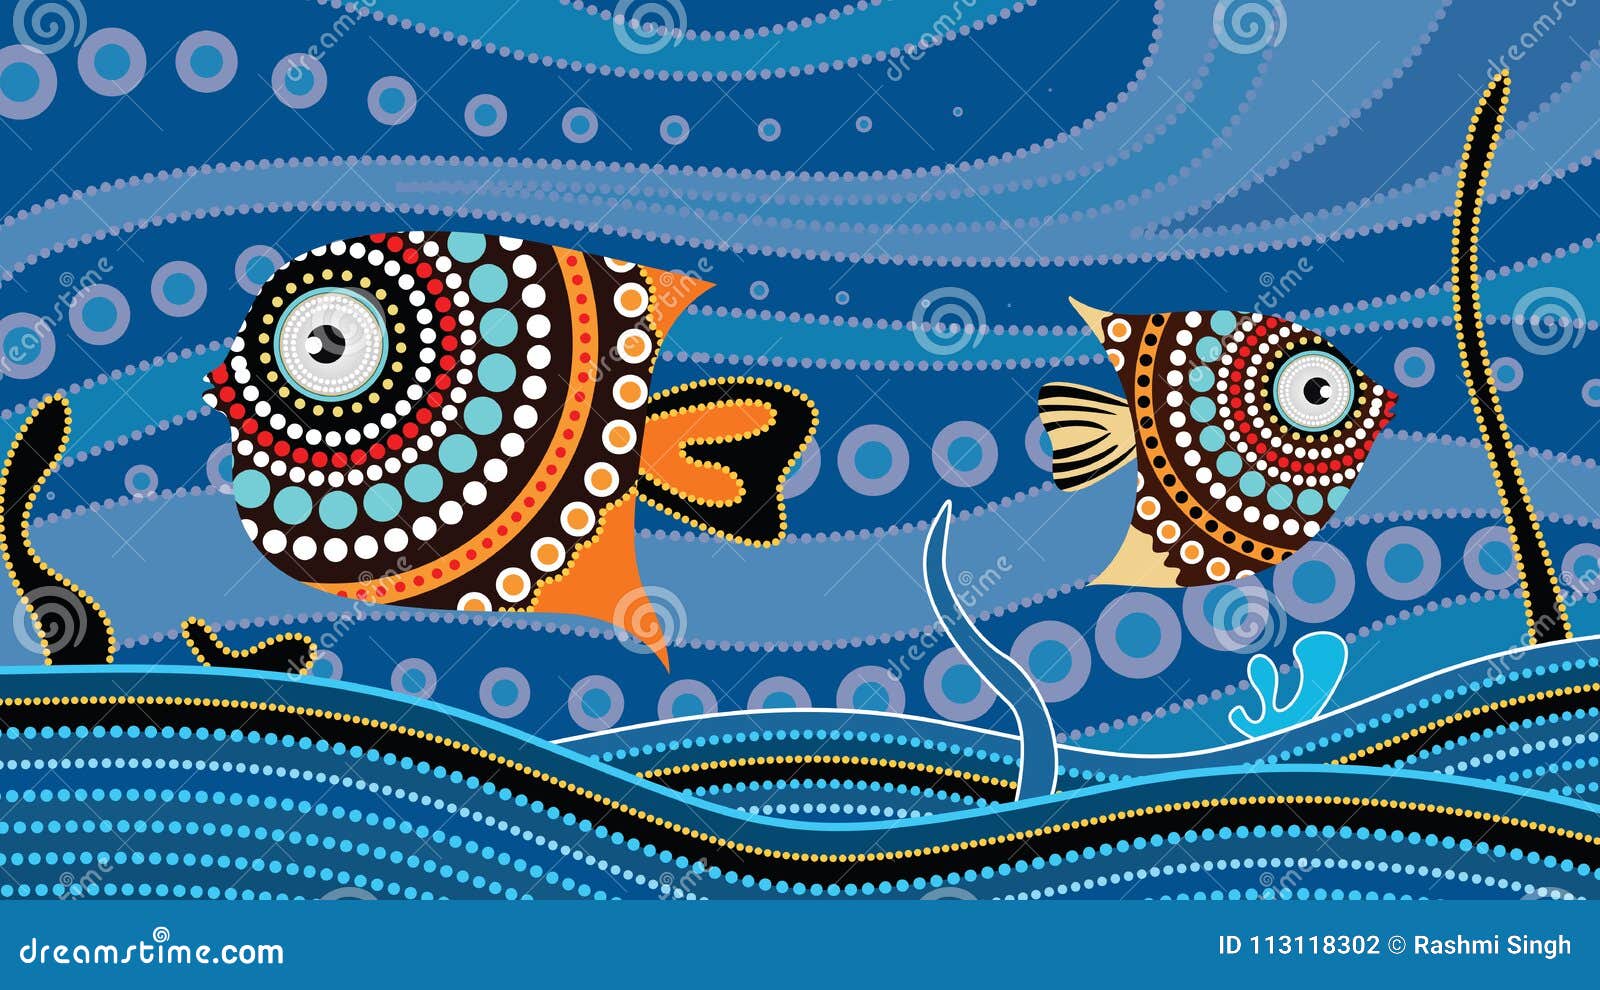 Aboriginal Dot Art Painting with Fish. Underwater Concept